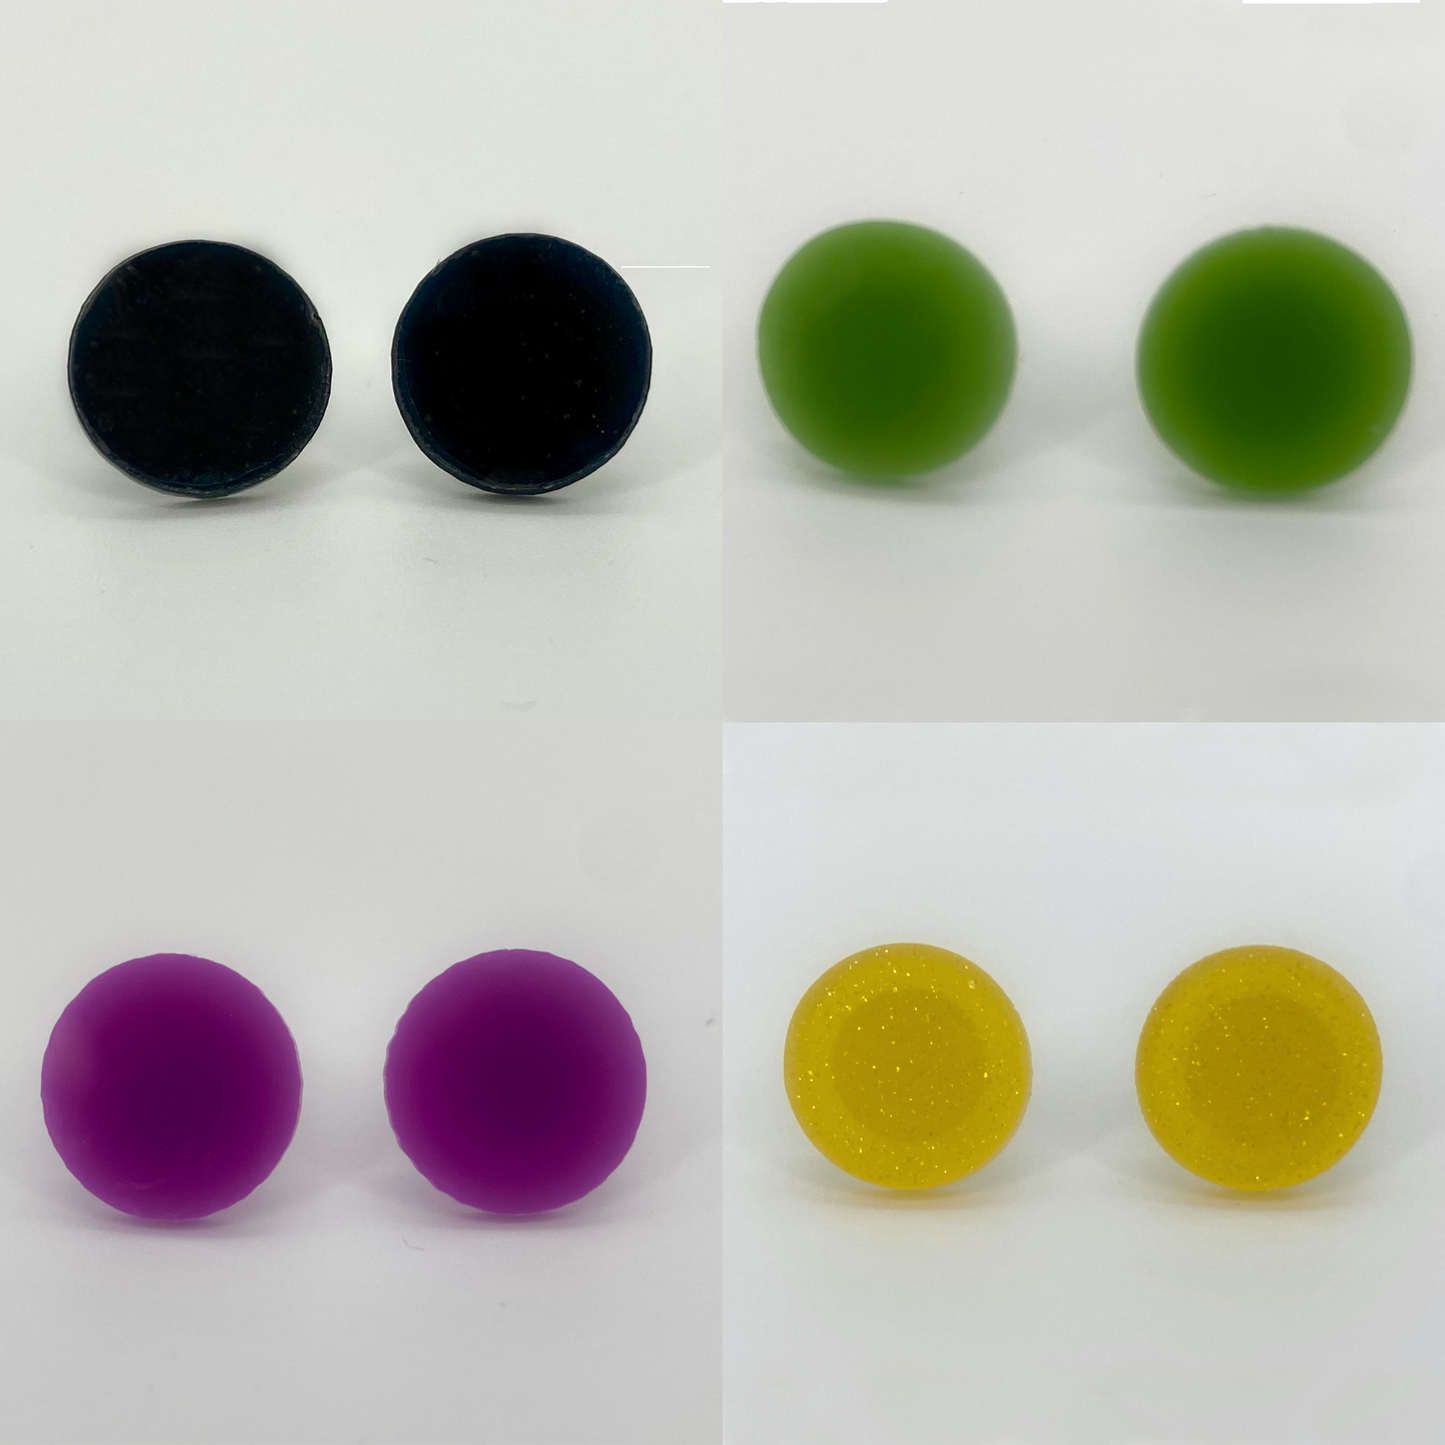 Round Blank Acrylic Earrings with Posts - 16mm - Set of 4 pair